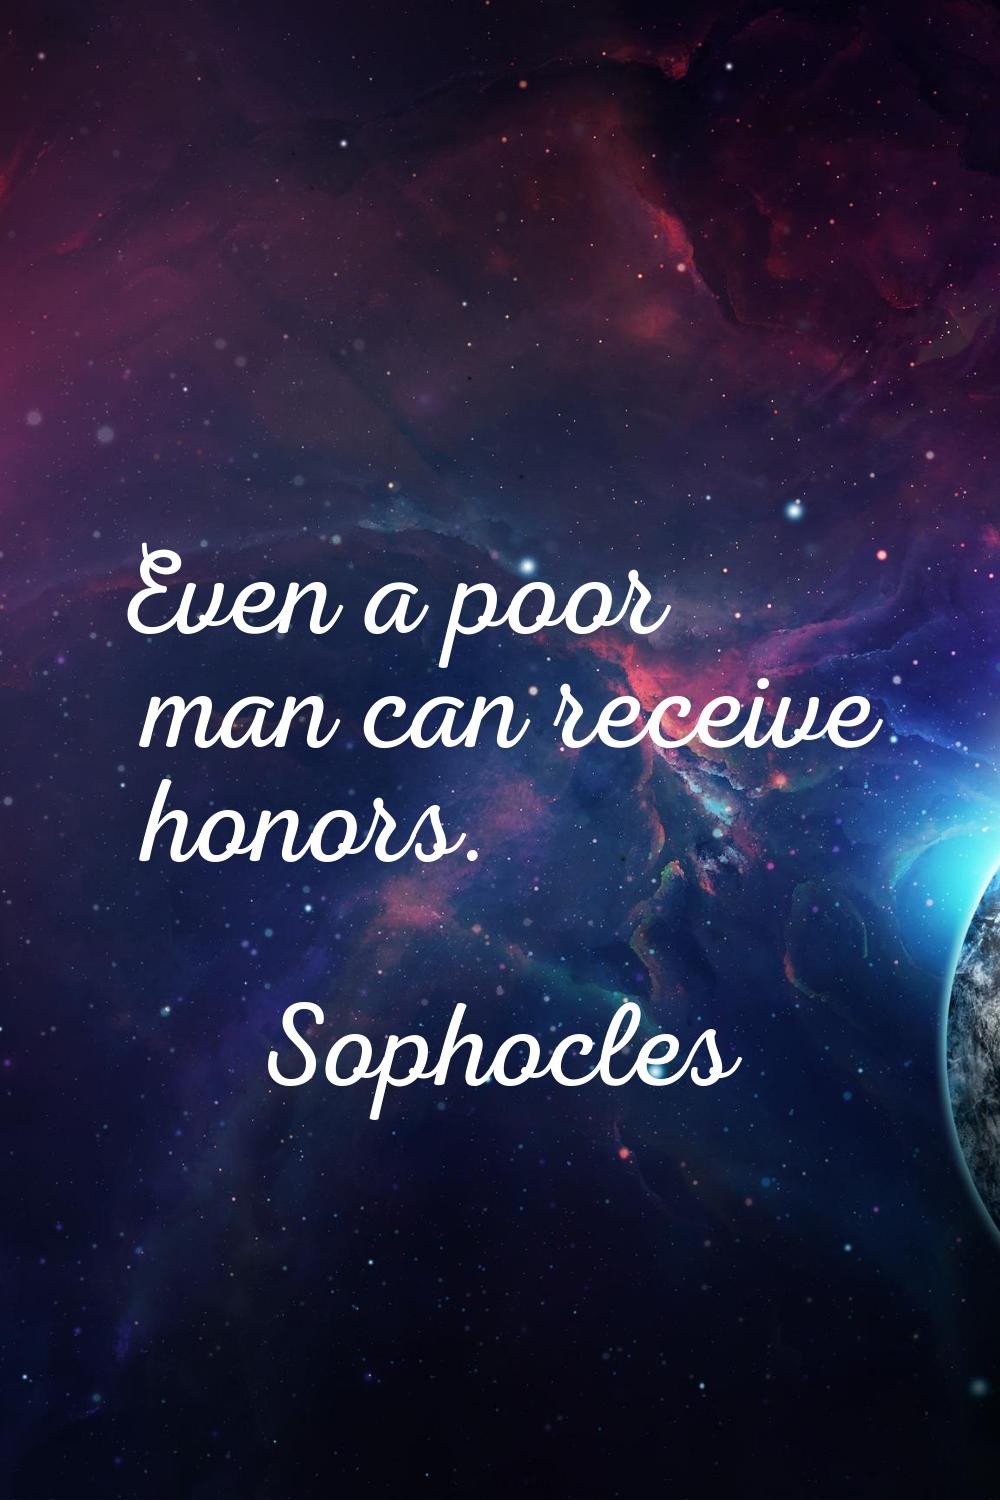 Even a poor man can receive honors.